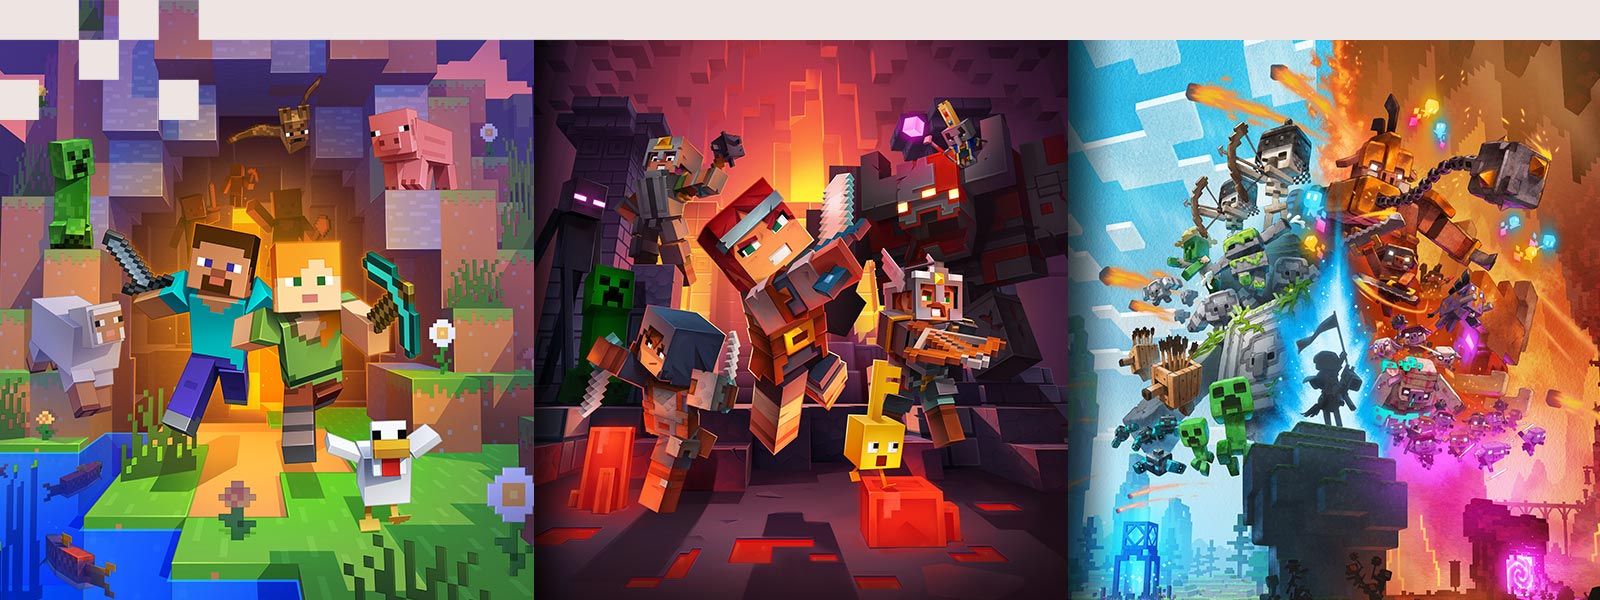 A collage of Minecraft characters from Minecraft, Minecraft Dungeons, and Minecraft Legends.